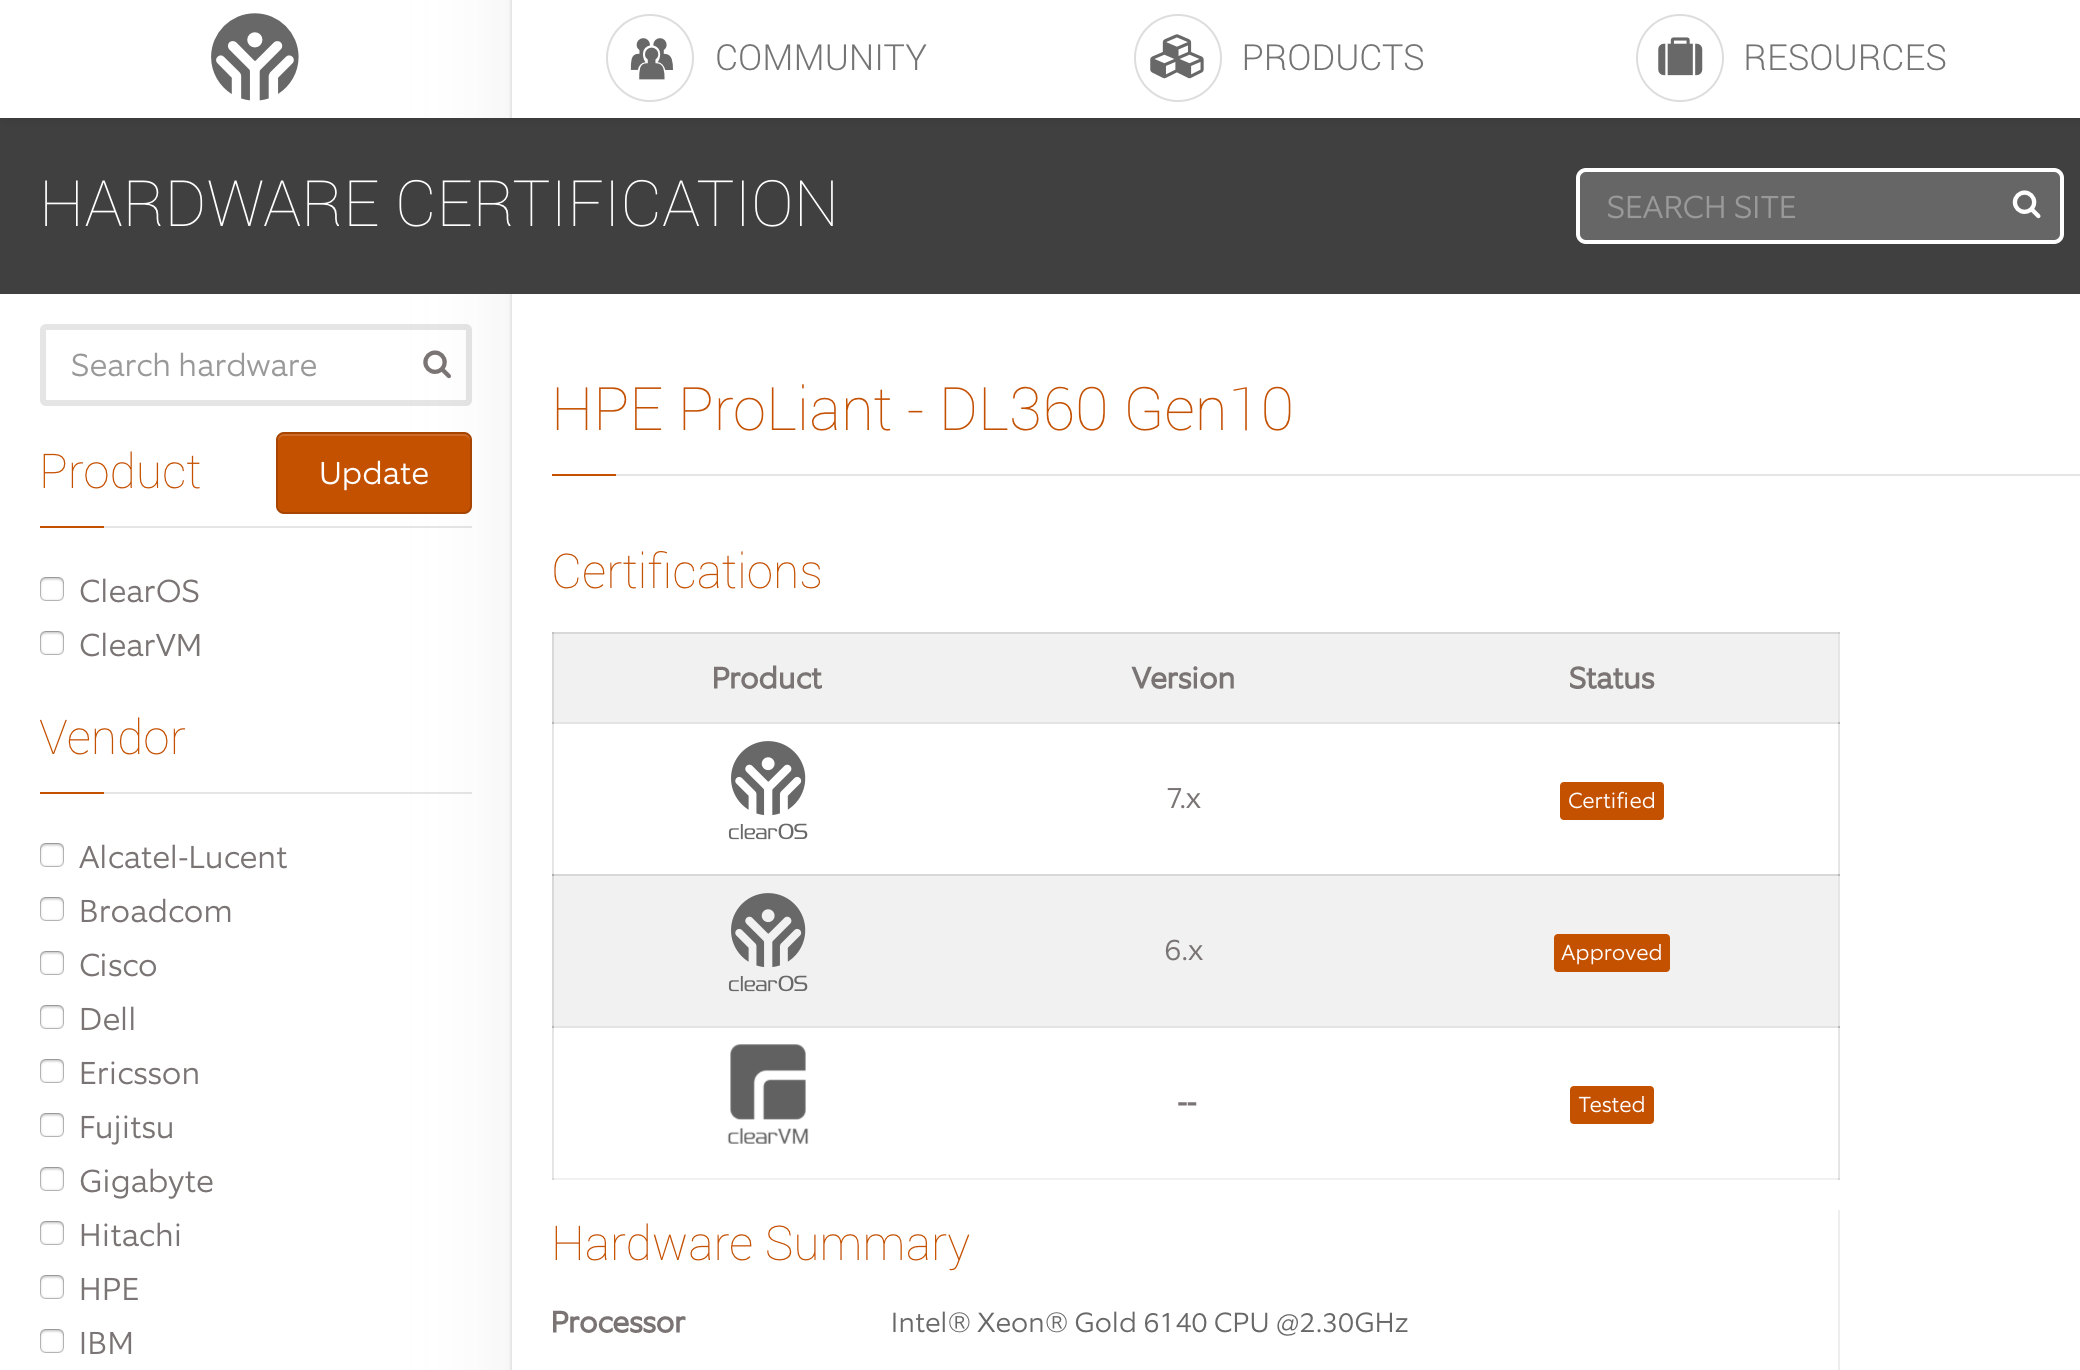 New HPE ProLiant Systems Added to Hardware Certification List